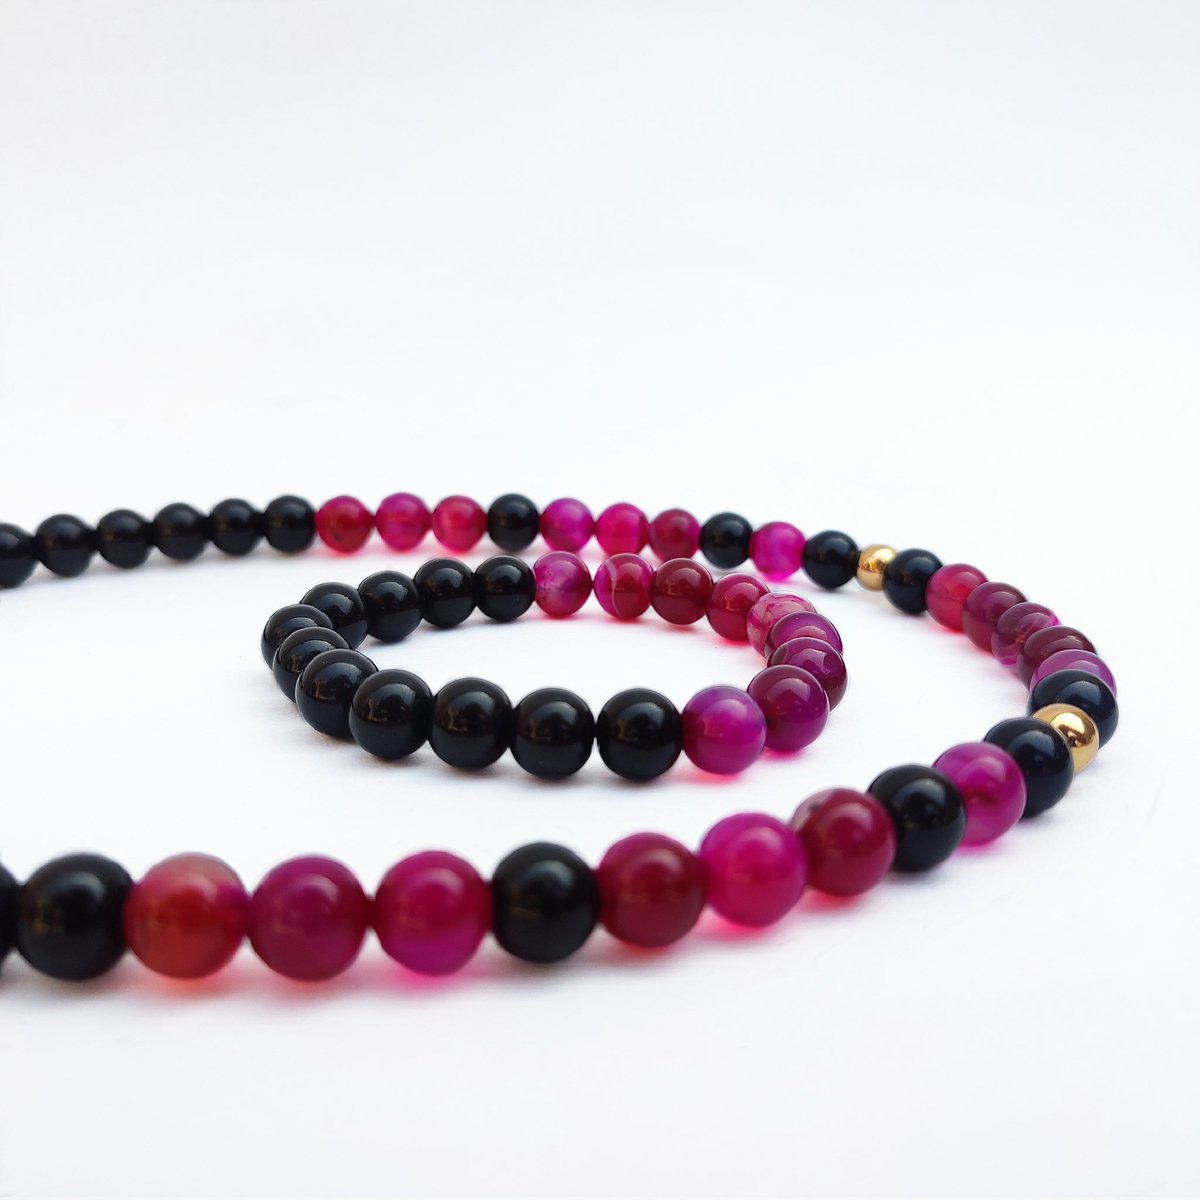 Men wear bright colours as well.
A magenta-colored necklace and bracelet set.

◾

#Marchian #personalizedjewelry #menstyle